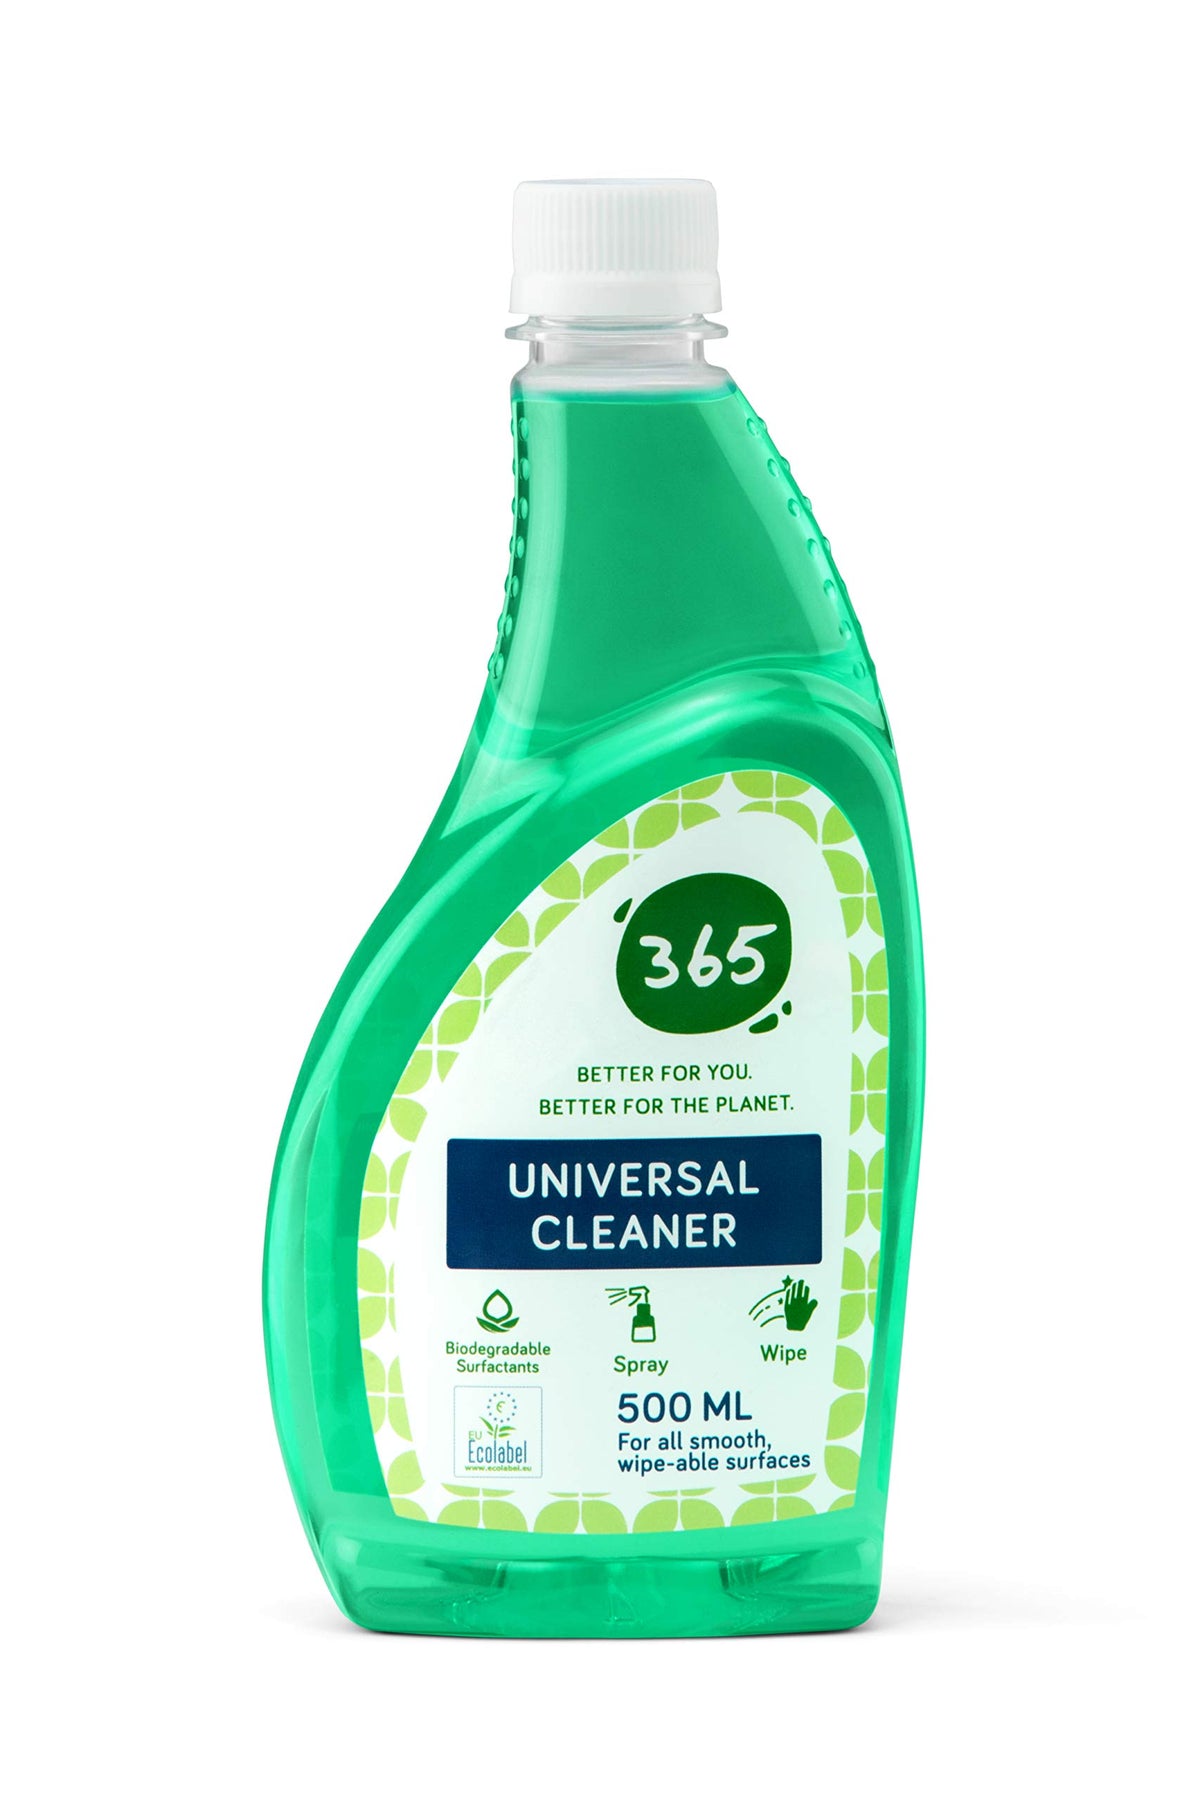 365 Universal All Purpose Cleaner (Spray) – 500ml | Certified with ECOLABEL, Biodegradable, Non-Toxic cleaner for all type of Hard Surfaces